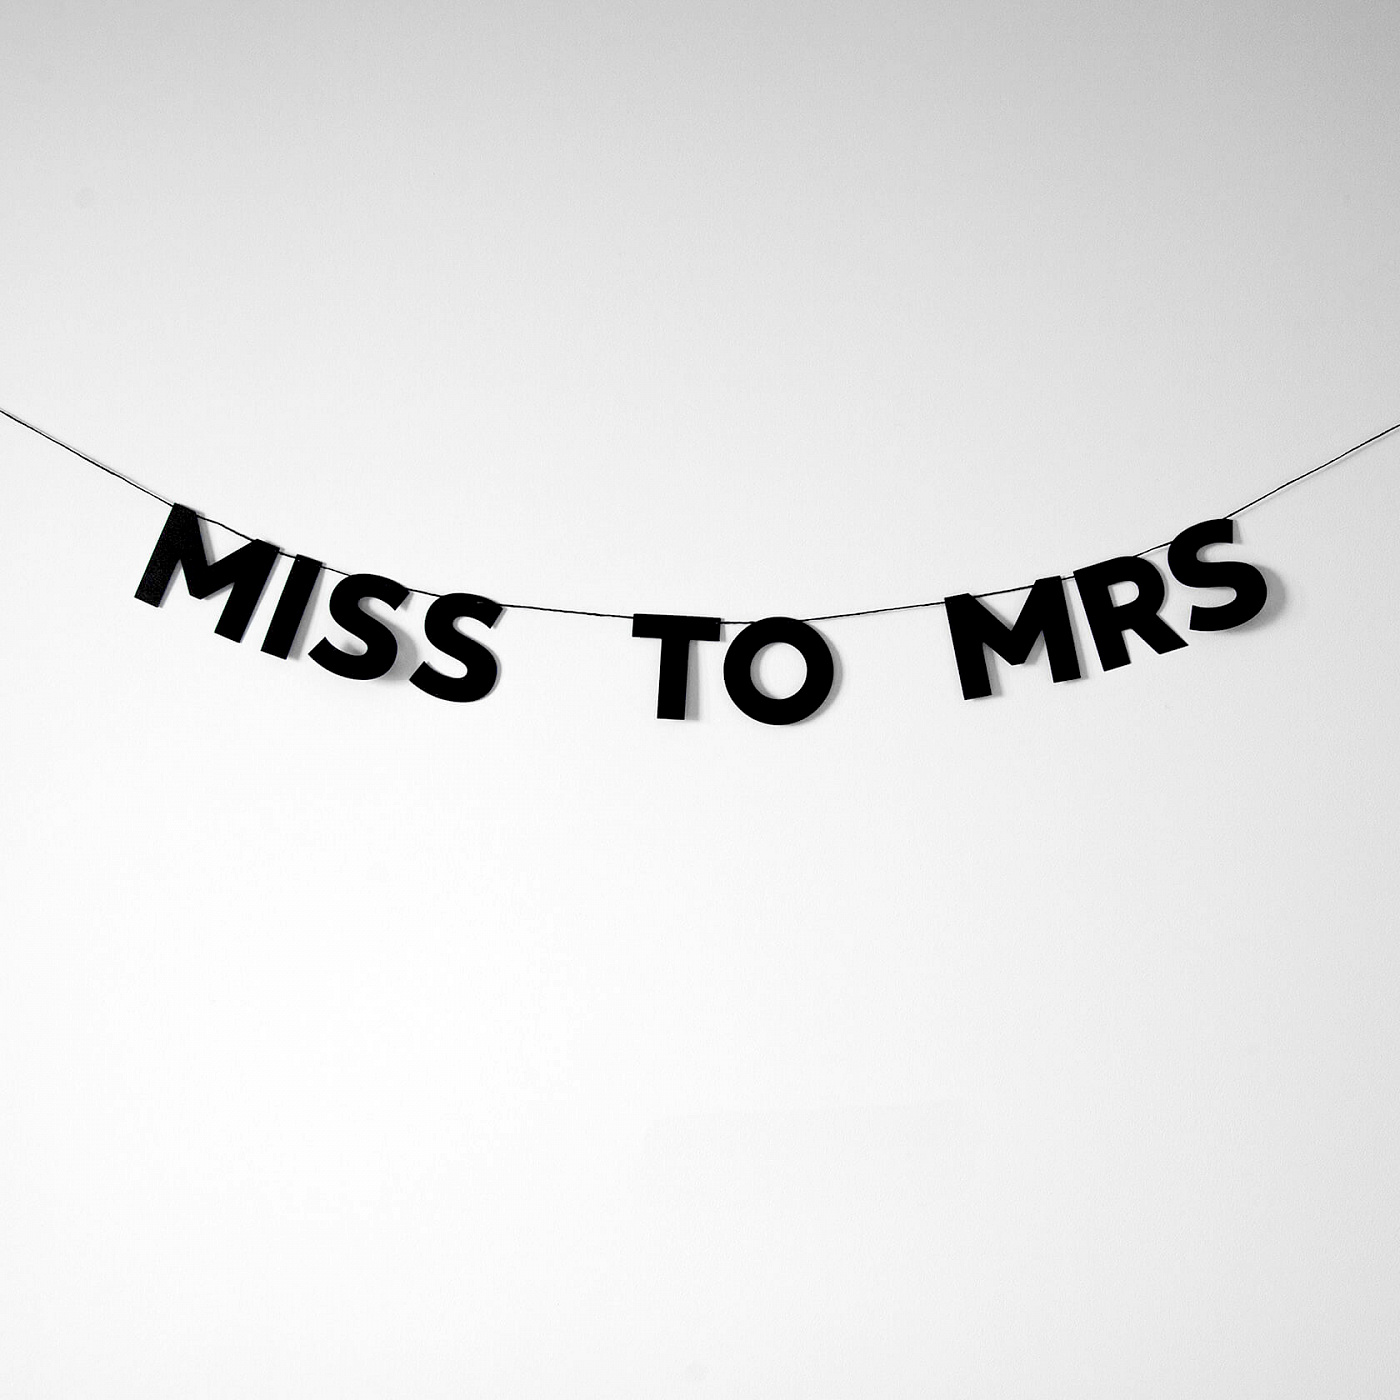  MISS TO MRS